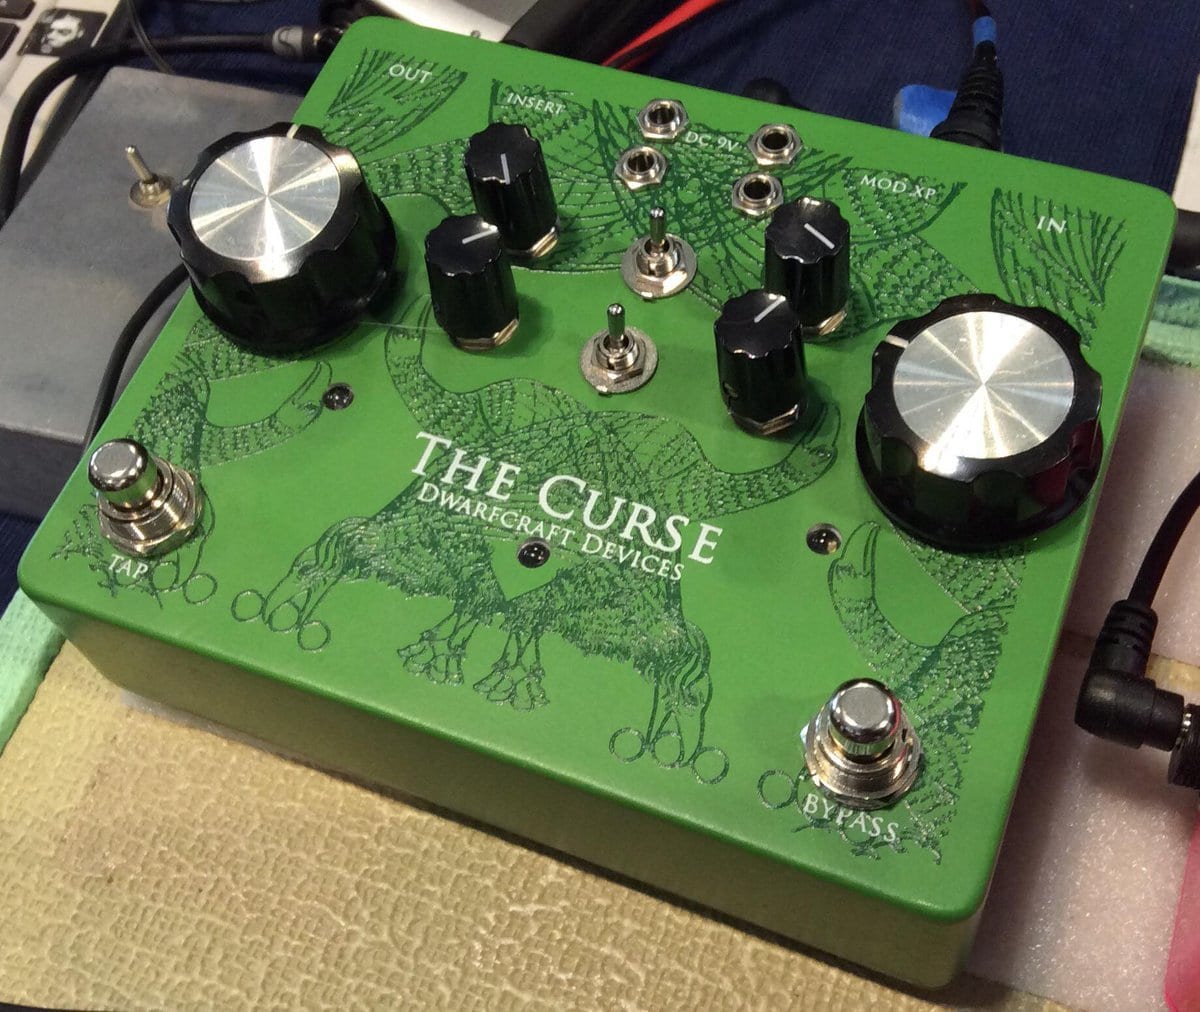 Dwarfcraft Devices The Curse delay pedal